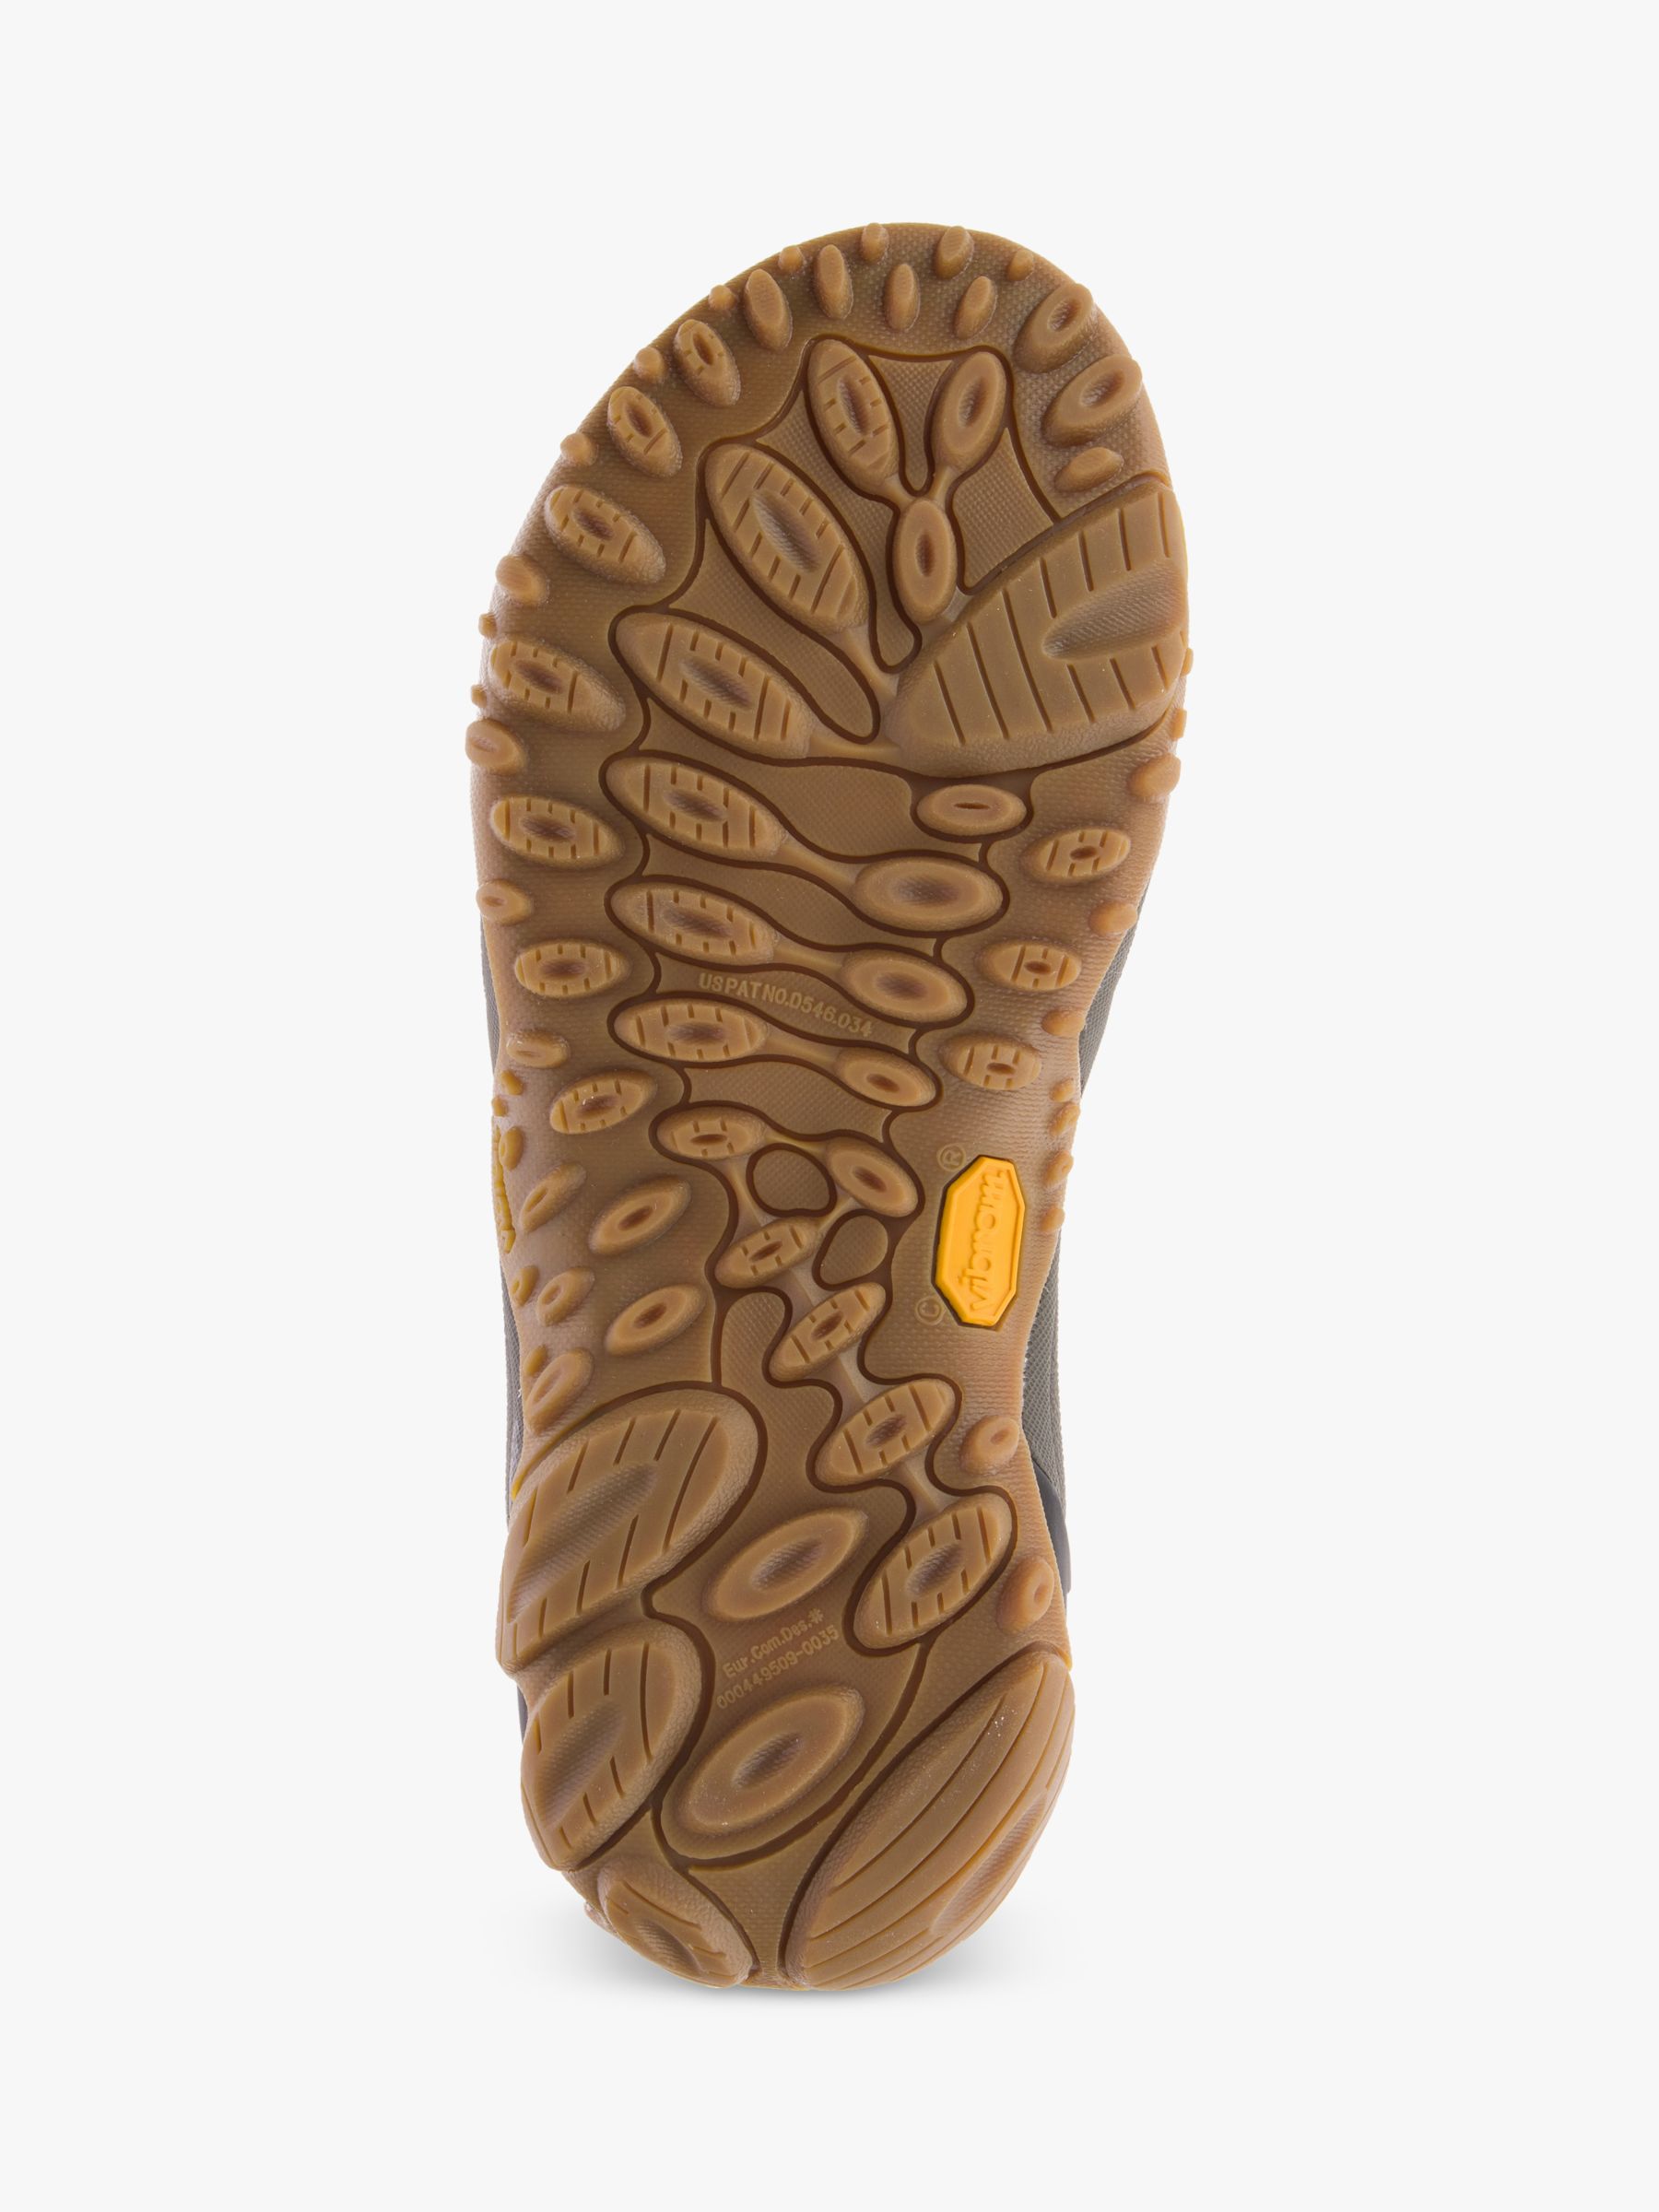 Buy Merrell Kahuna 3 Women's Sandals, Classic Taupe Online at johnlewis.com